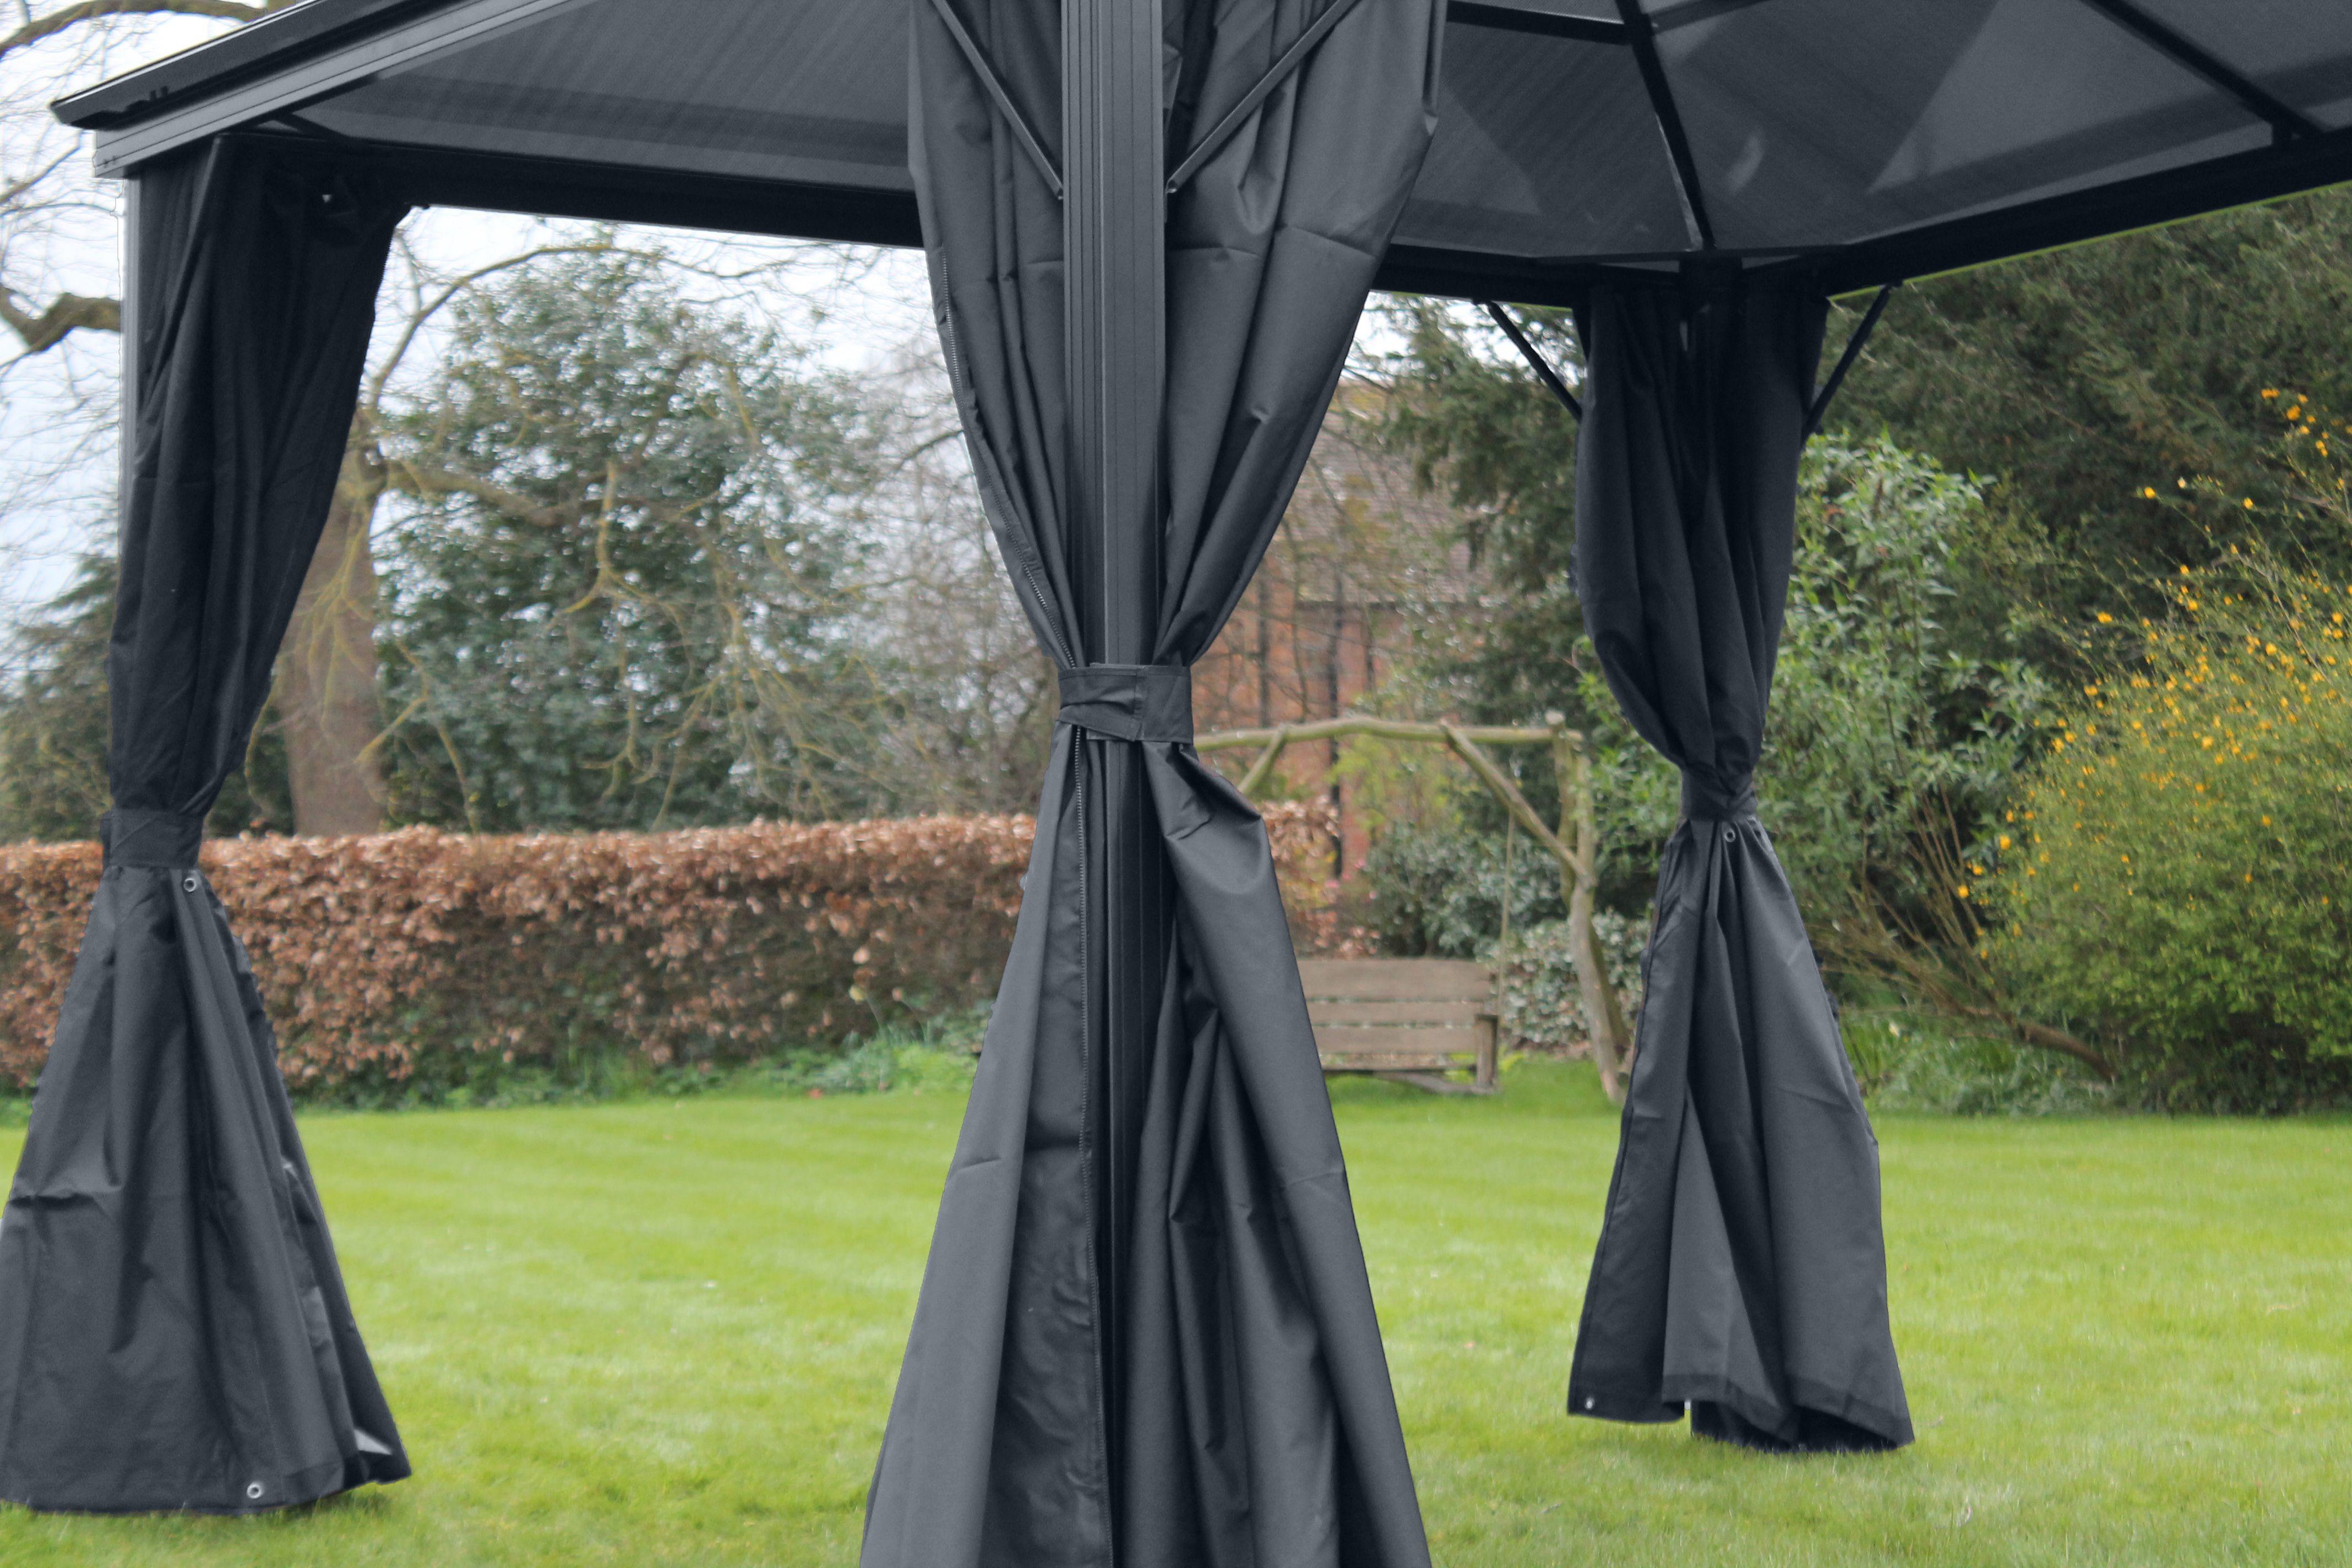 garden gazebo with polycarbonate roof and grey curtains clipped back